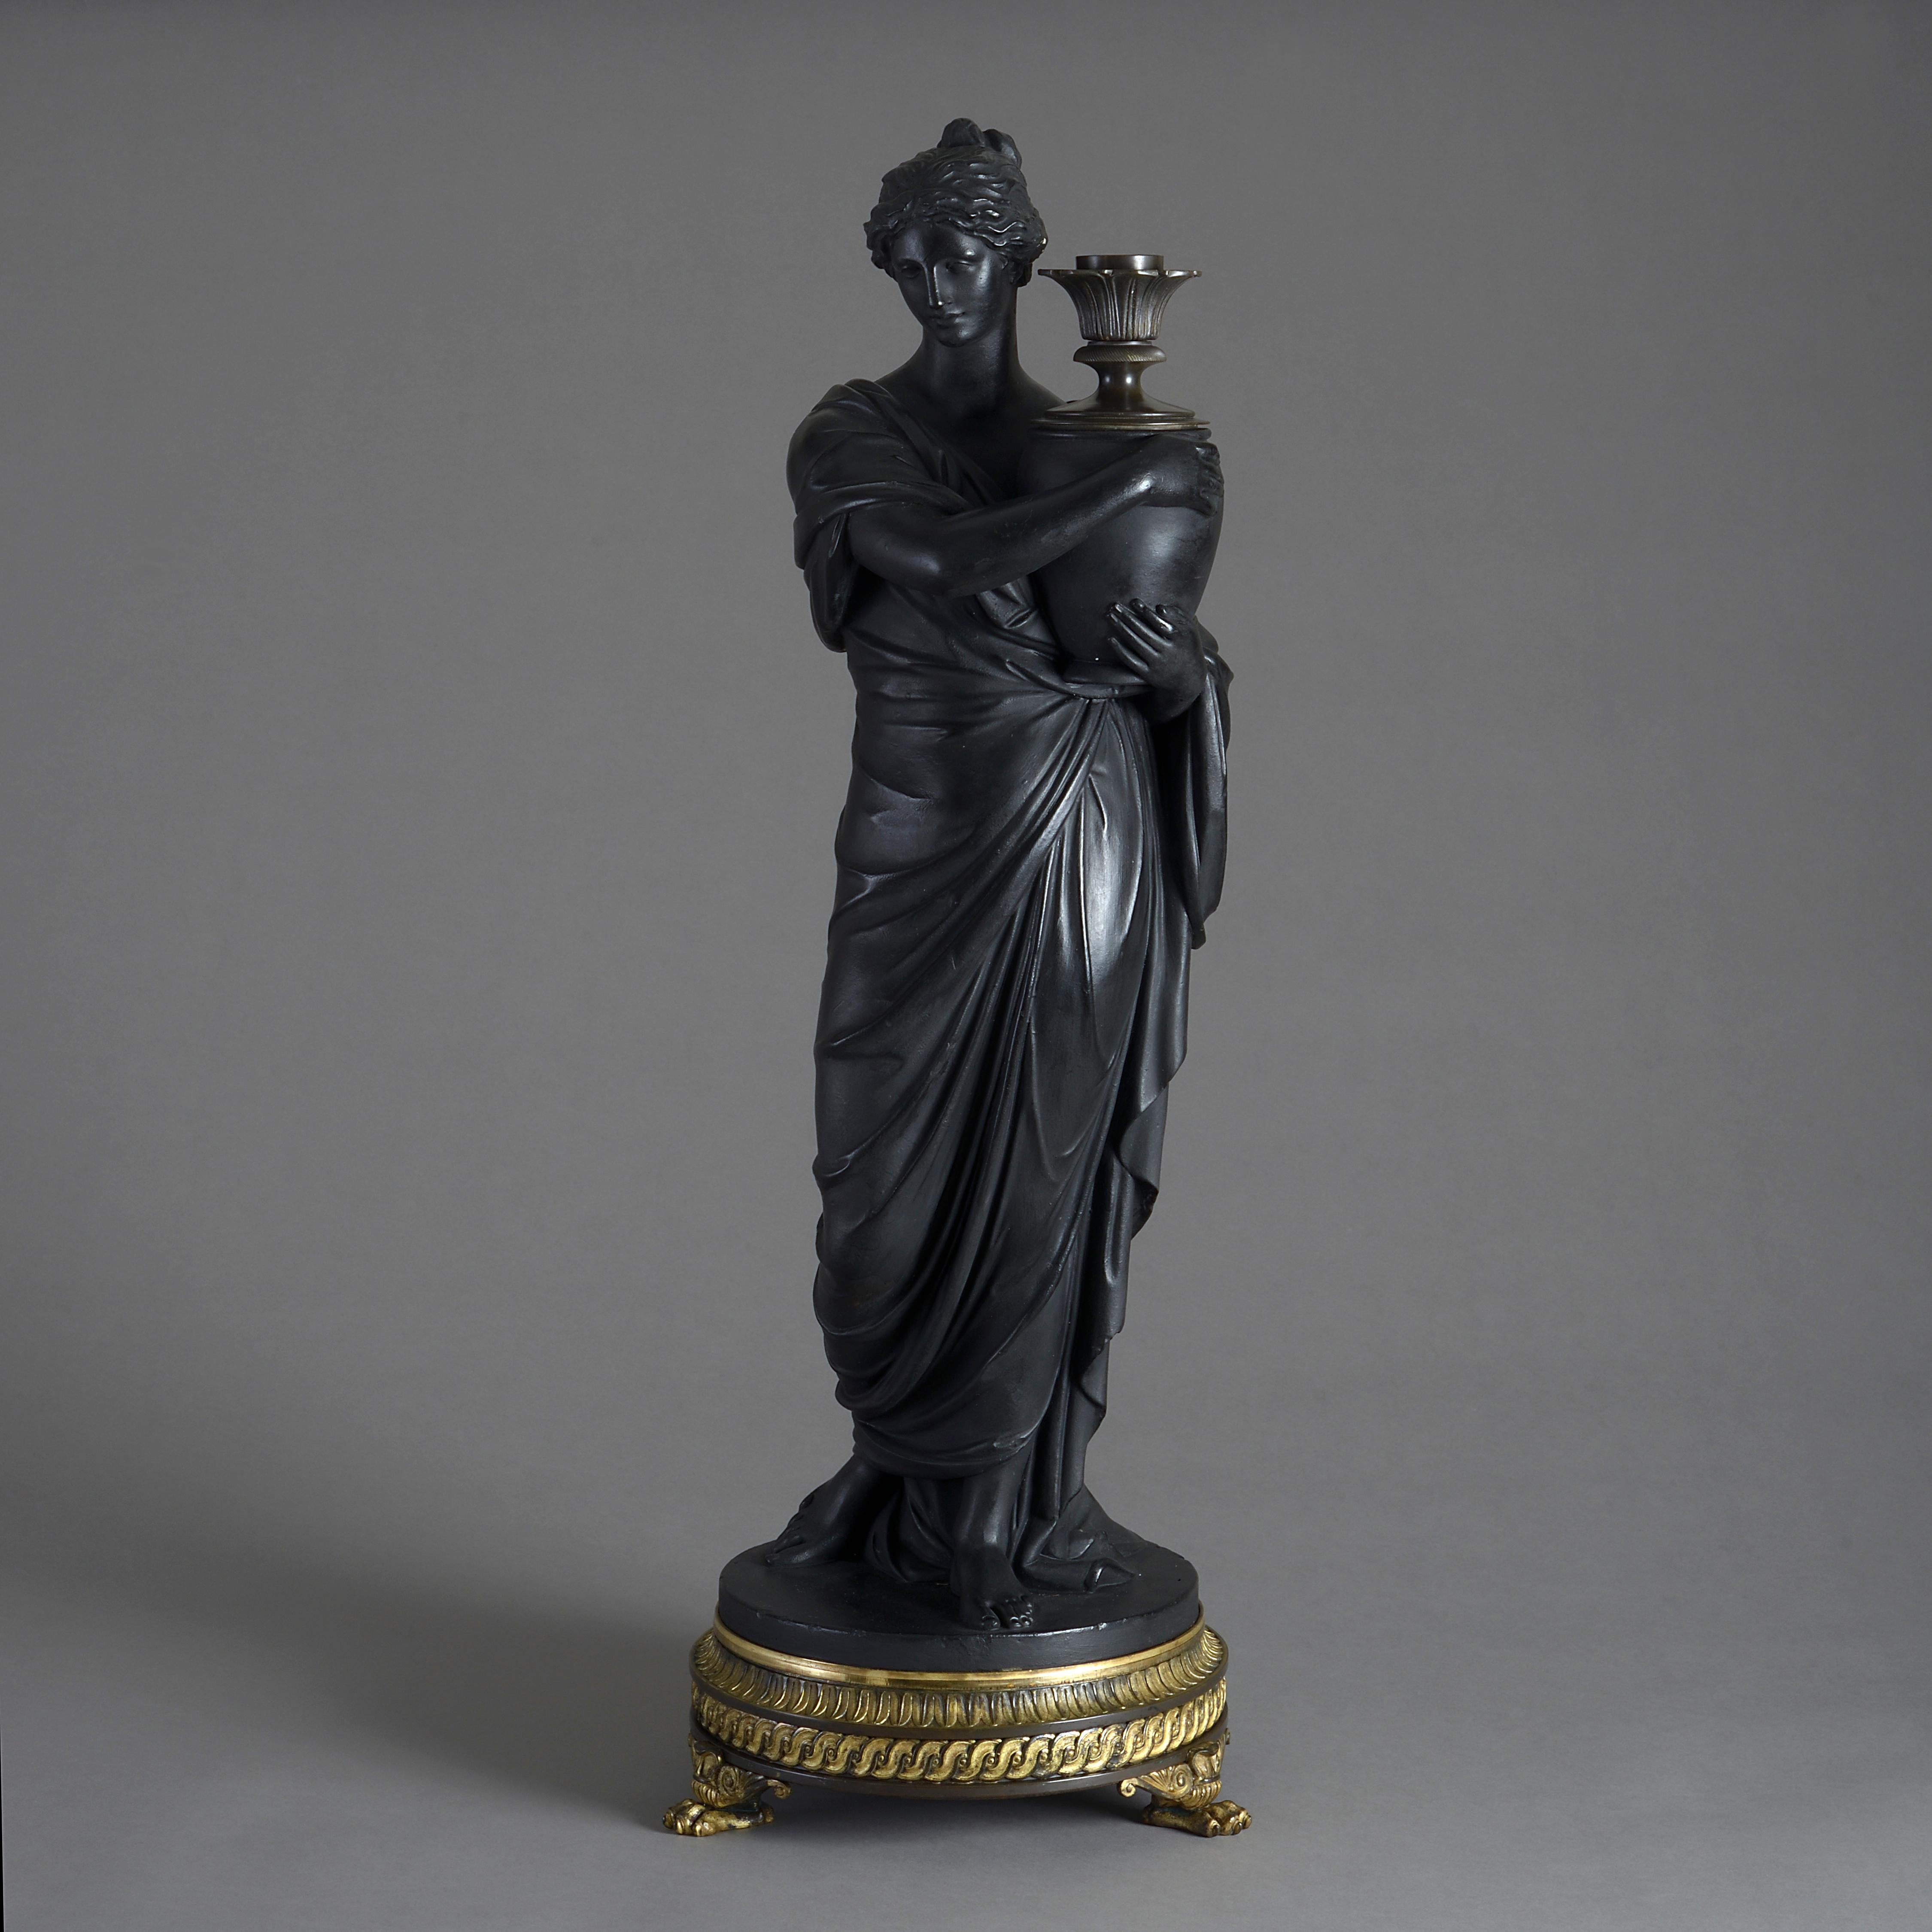 A fine regency bronzed plaster figure of a vestal bearing a lamp by Thomas hopper, circa 1807.

Signed H. HOPPER LONDON JULY 6 1807.

With its original bronze lamp fitting and fine bronze and ormolu base with stiff leaf and guilloche mouldings